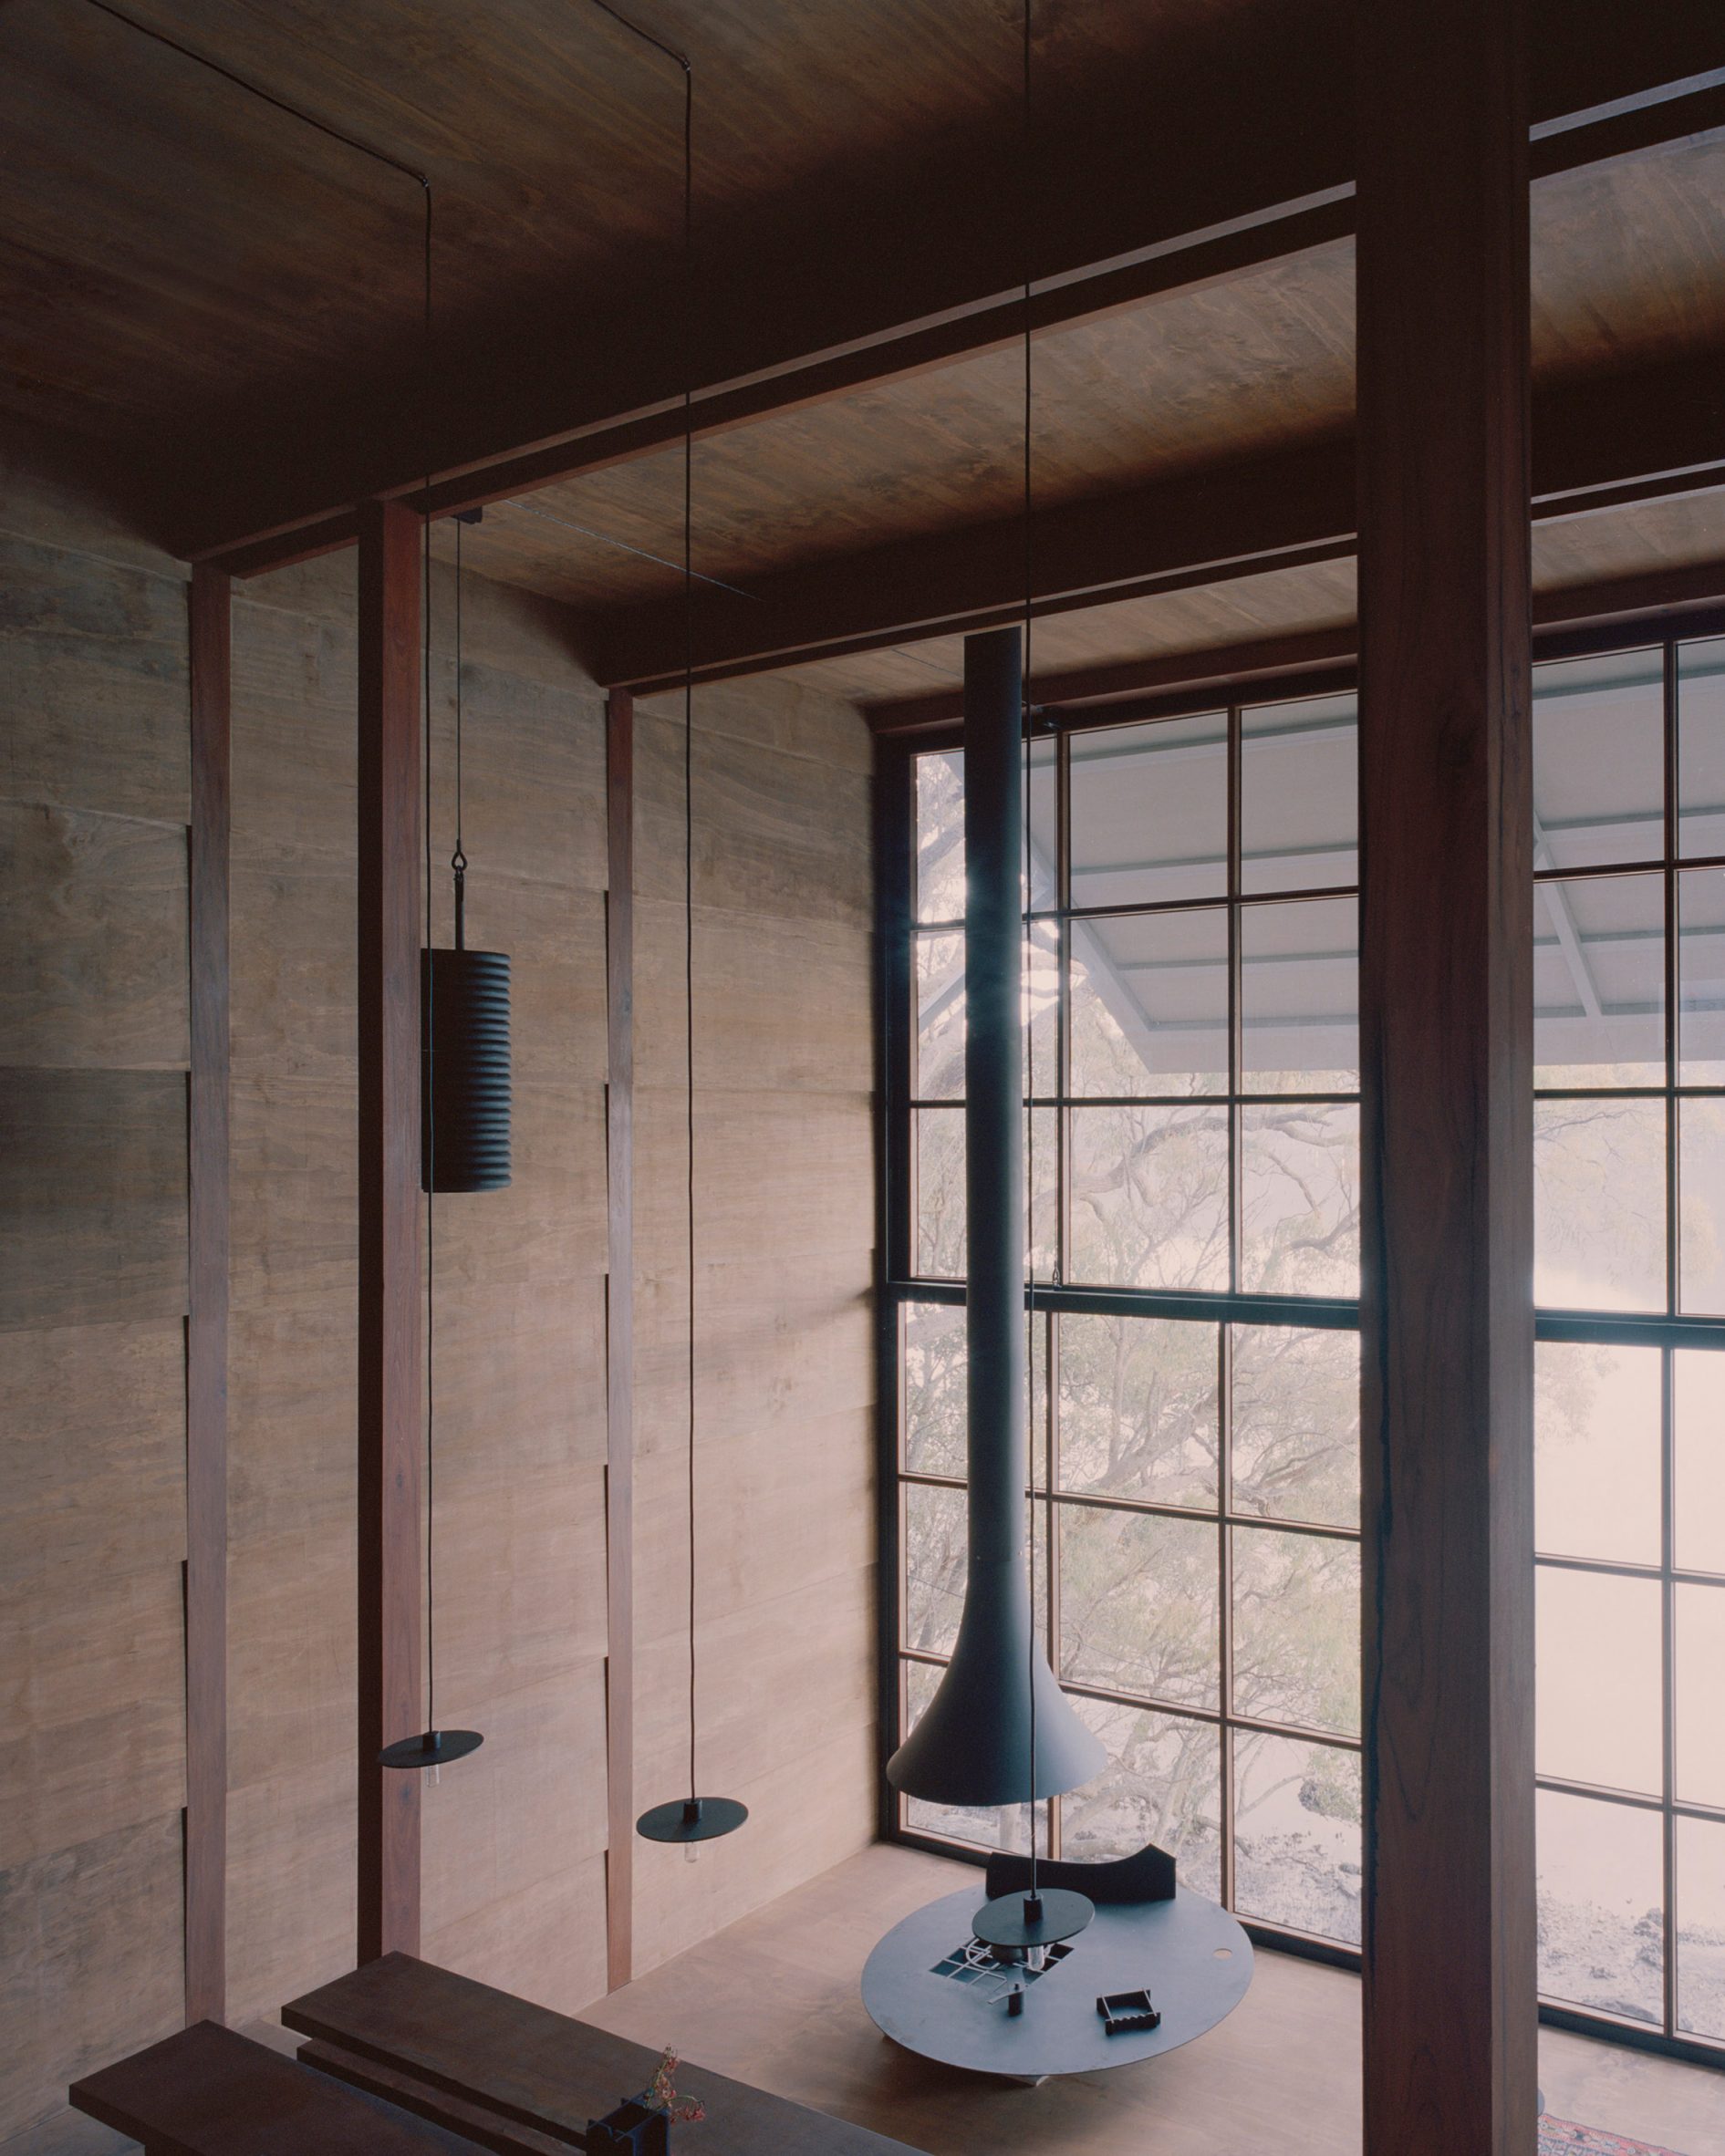 Image of the interior of the wooden house overlooking the stream